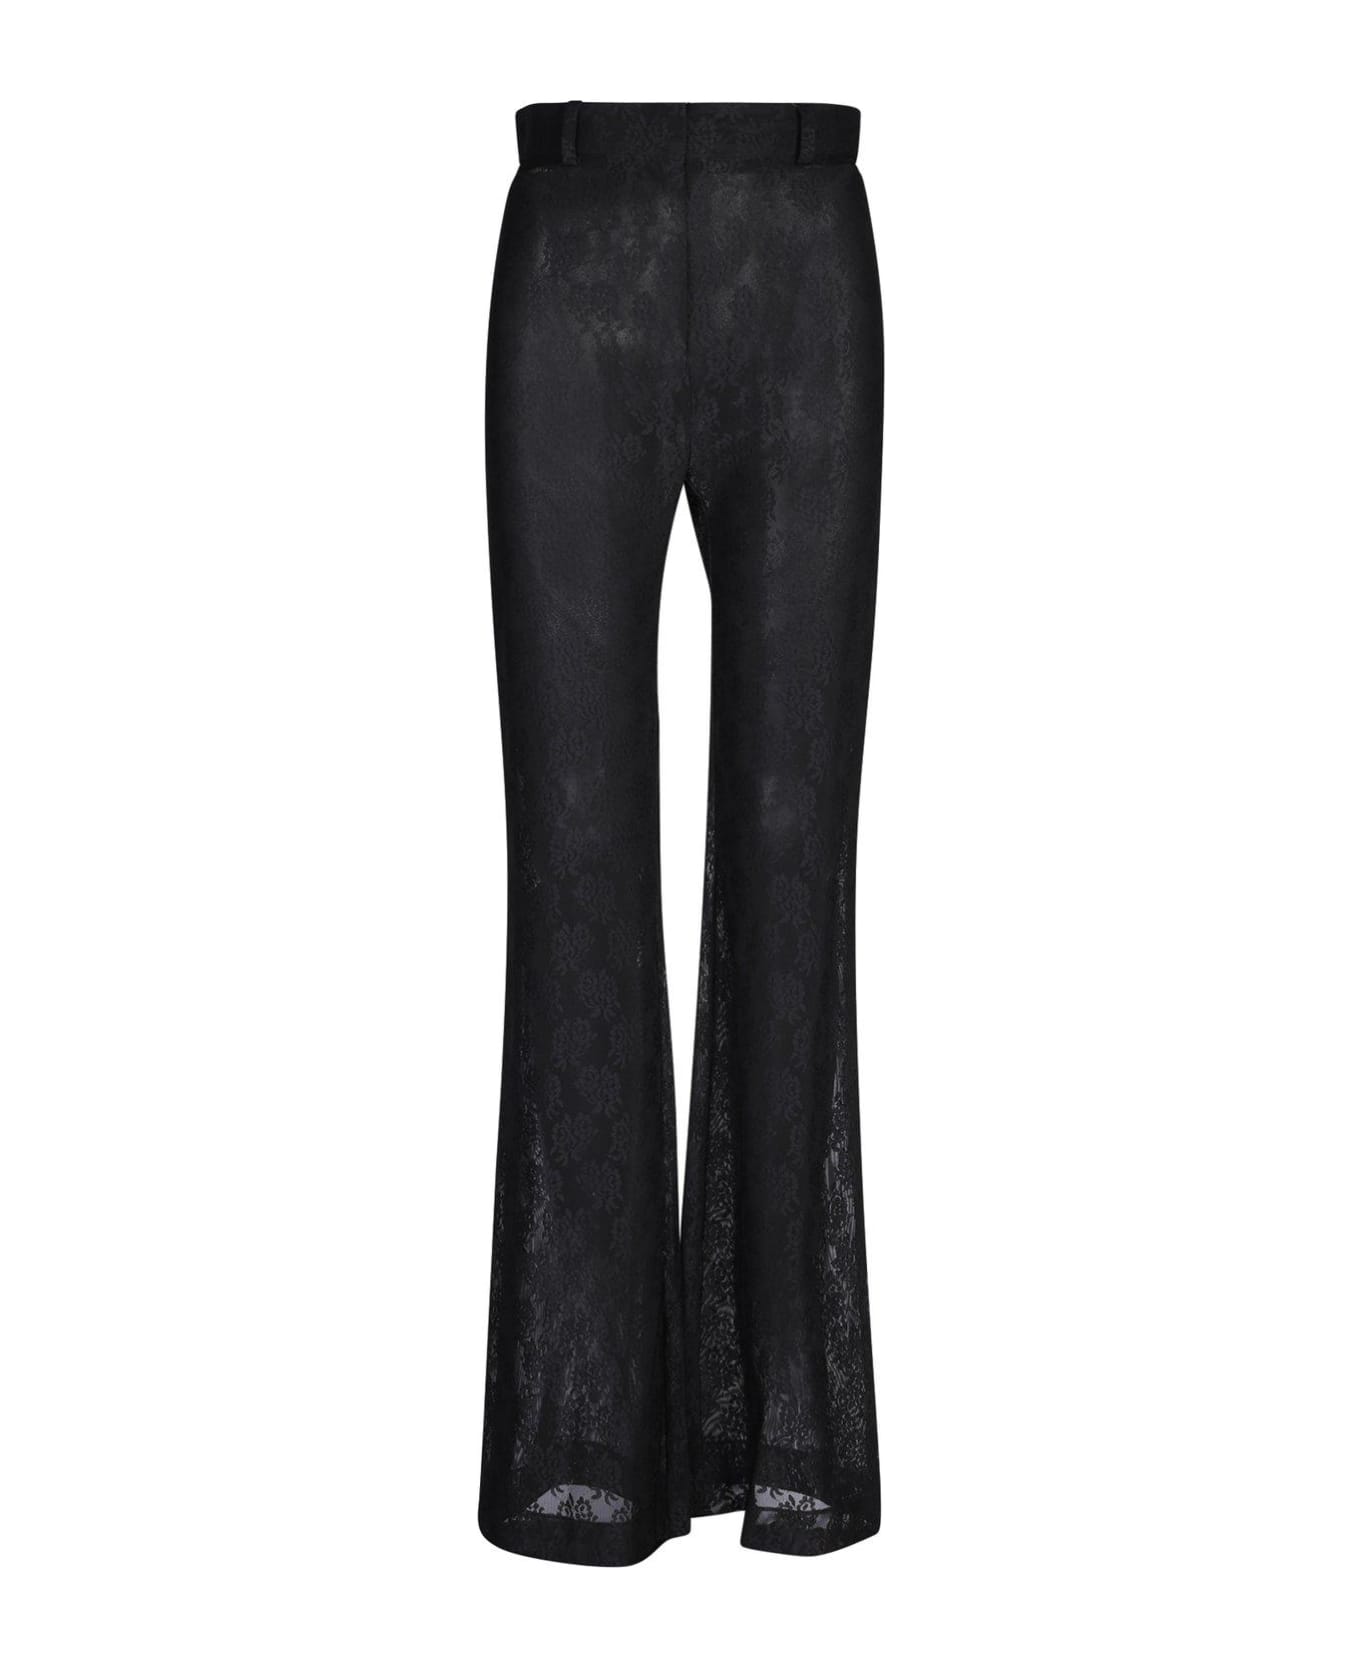 Moschino High-waist Floral-laced Sheer Flared Trousers - BLACK